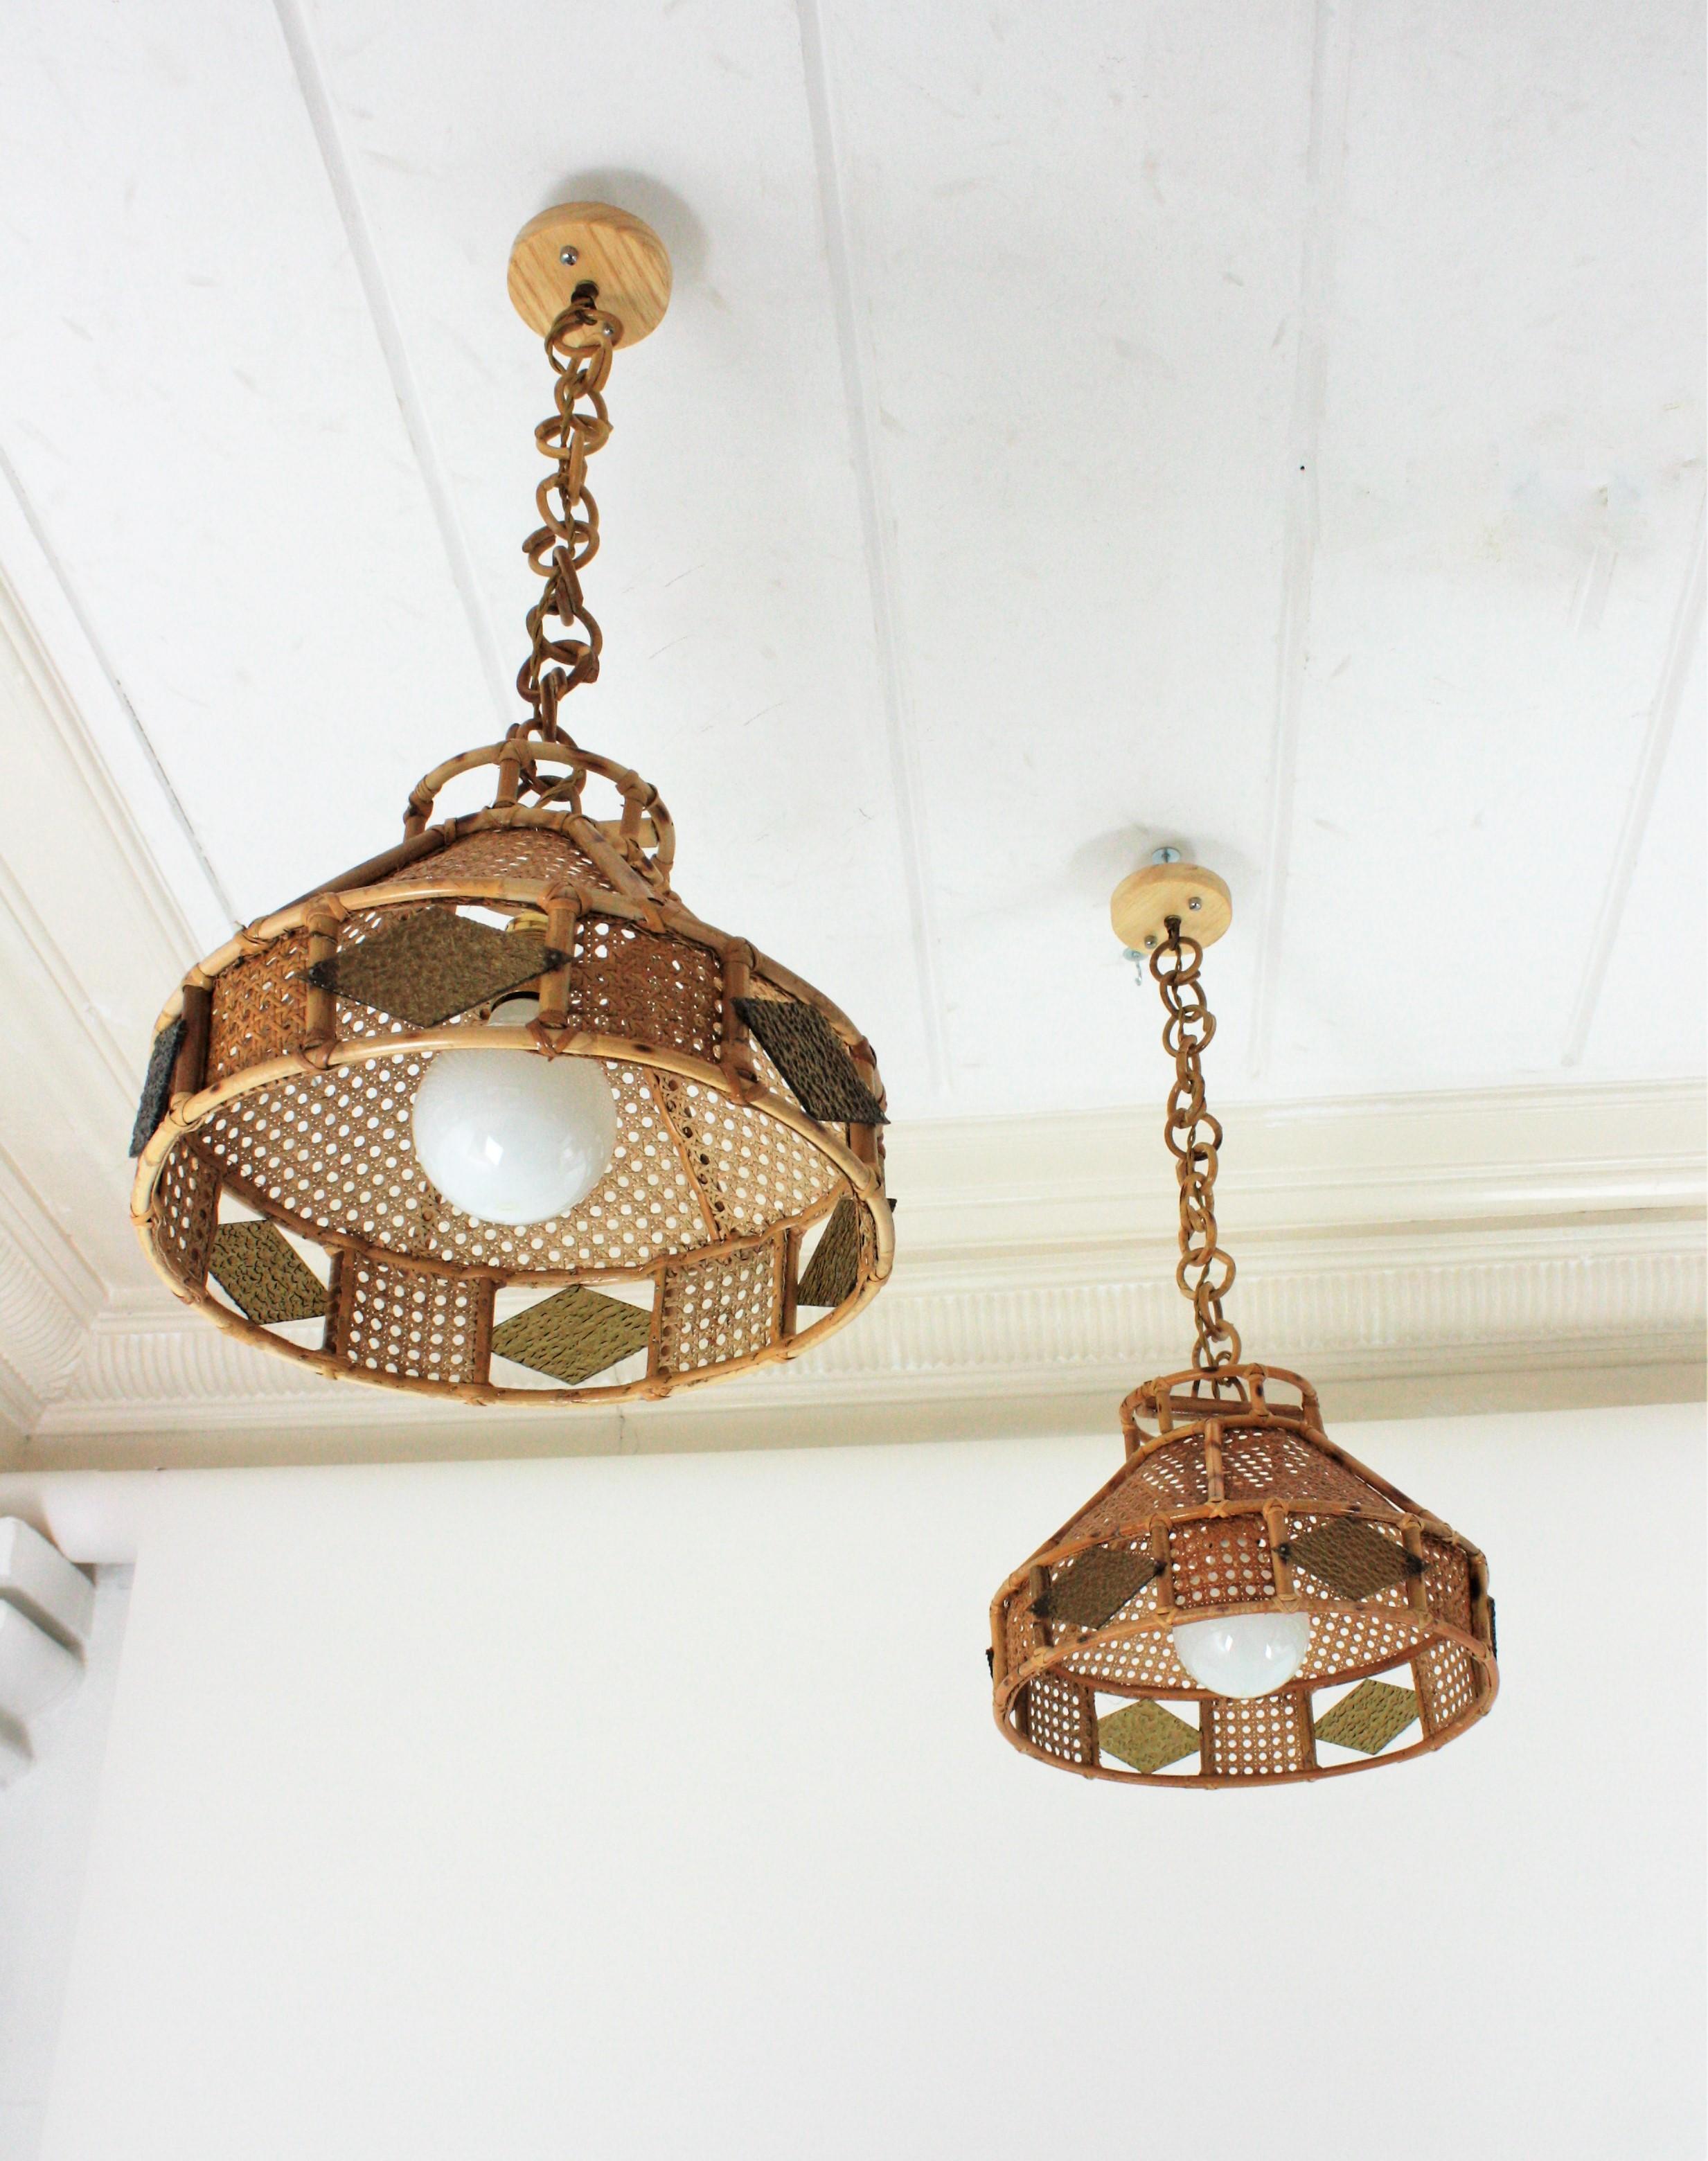 Italian Modern Wicker Wire Rattan Pendant Hanging Lights with Glass Accent, Pair For Sale 4